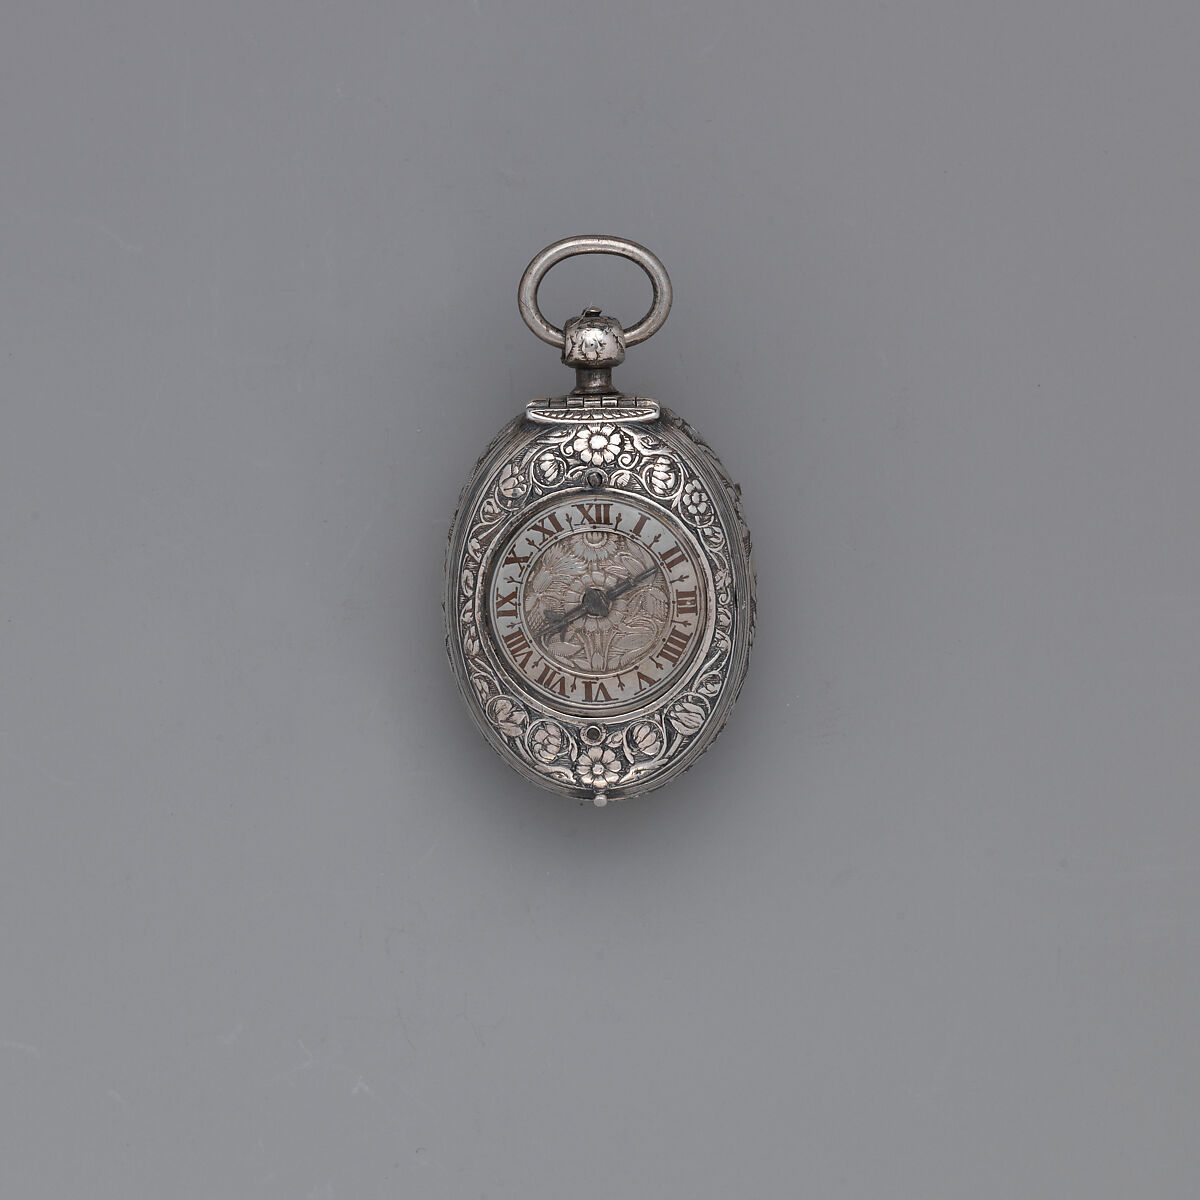 Watch, Movement by John Midnall (recorded ca. 1620–41), Case: silver; Movement: gilded brass and steel, partly blued, British, London 